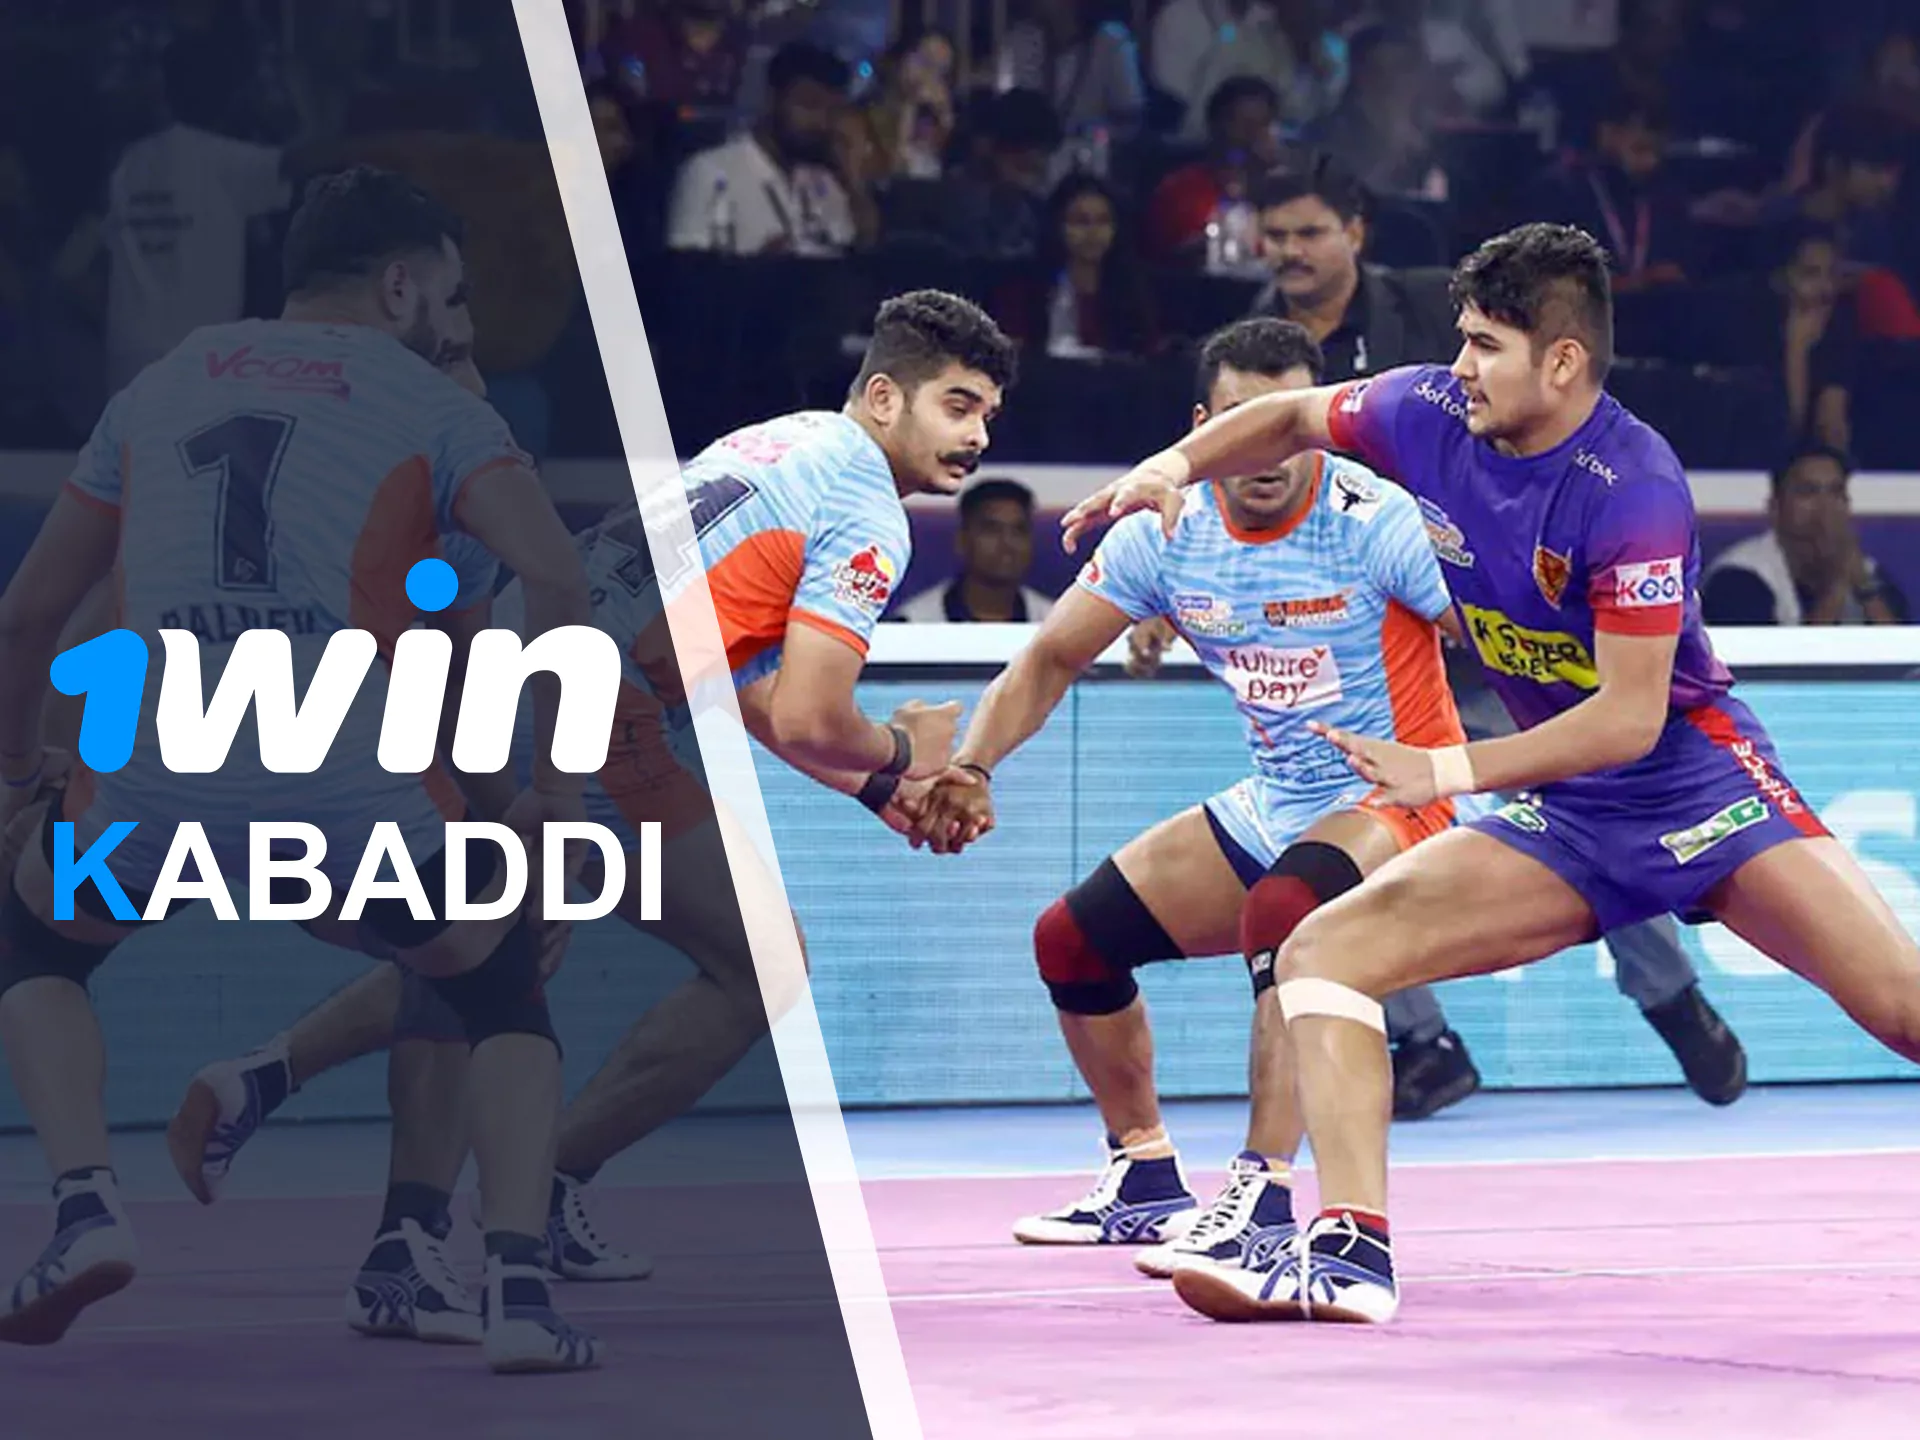 Choose the fastest kabaddi team to bet on at 1win.